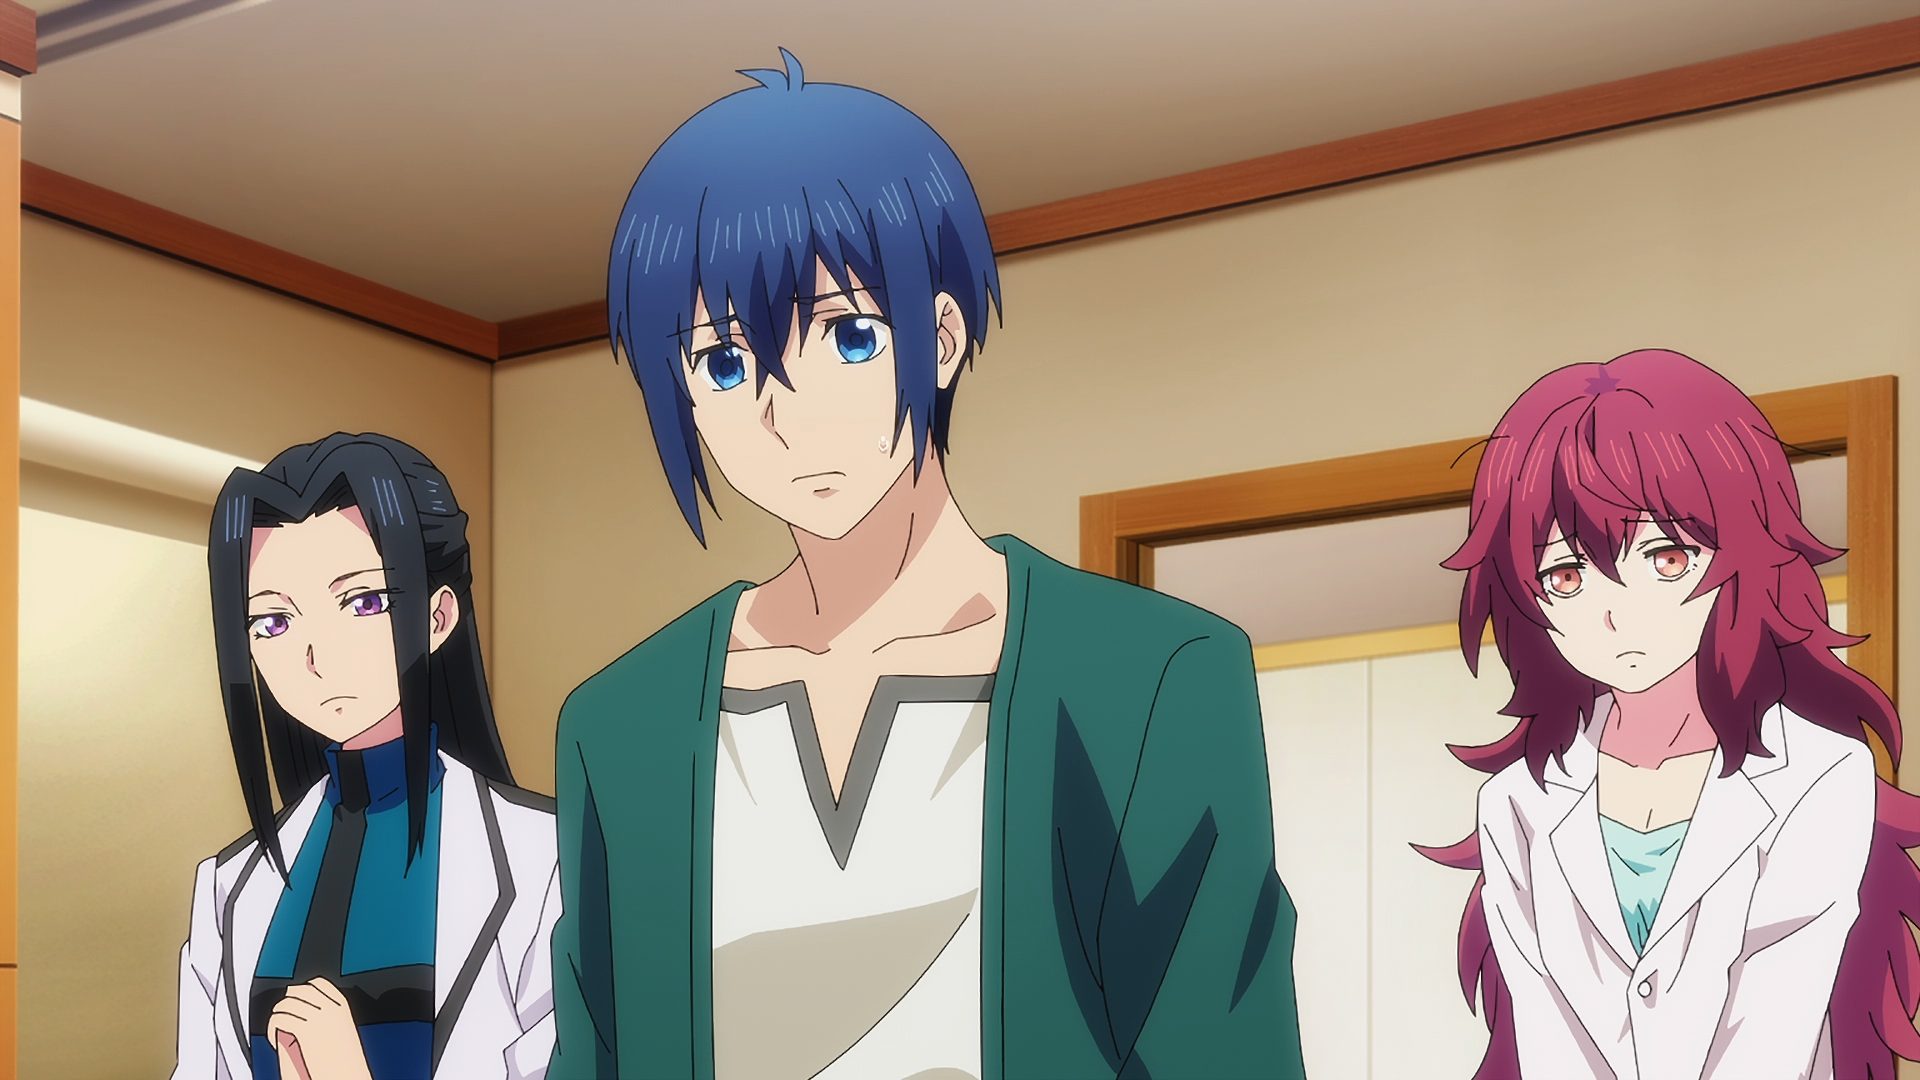 World's End Harem Episode 12: Is It Happening? Preview & Release Date